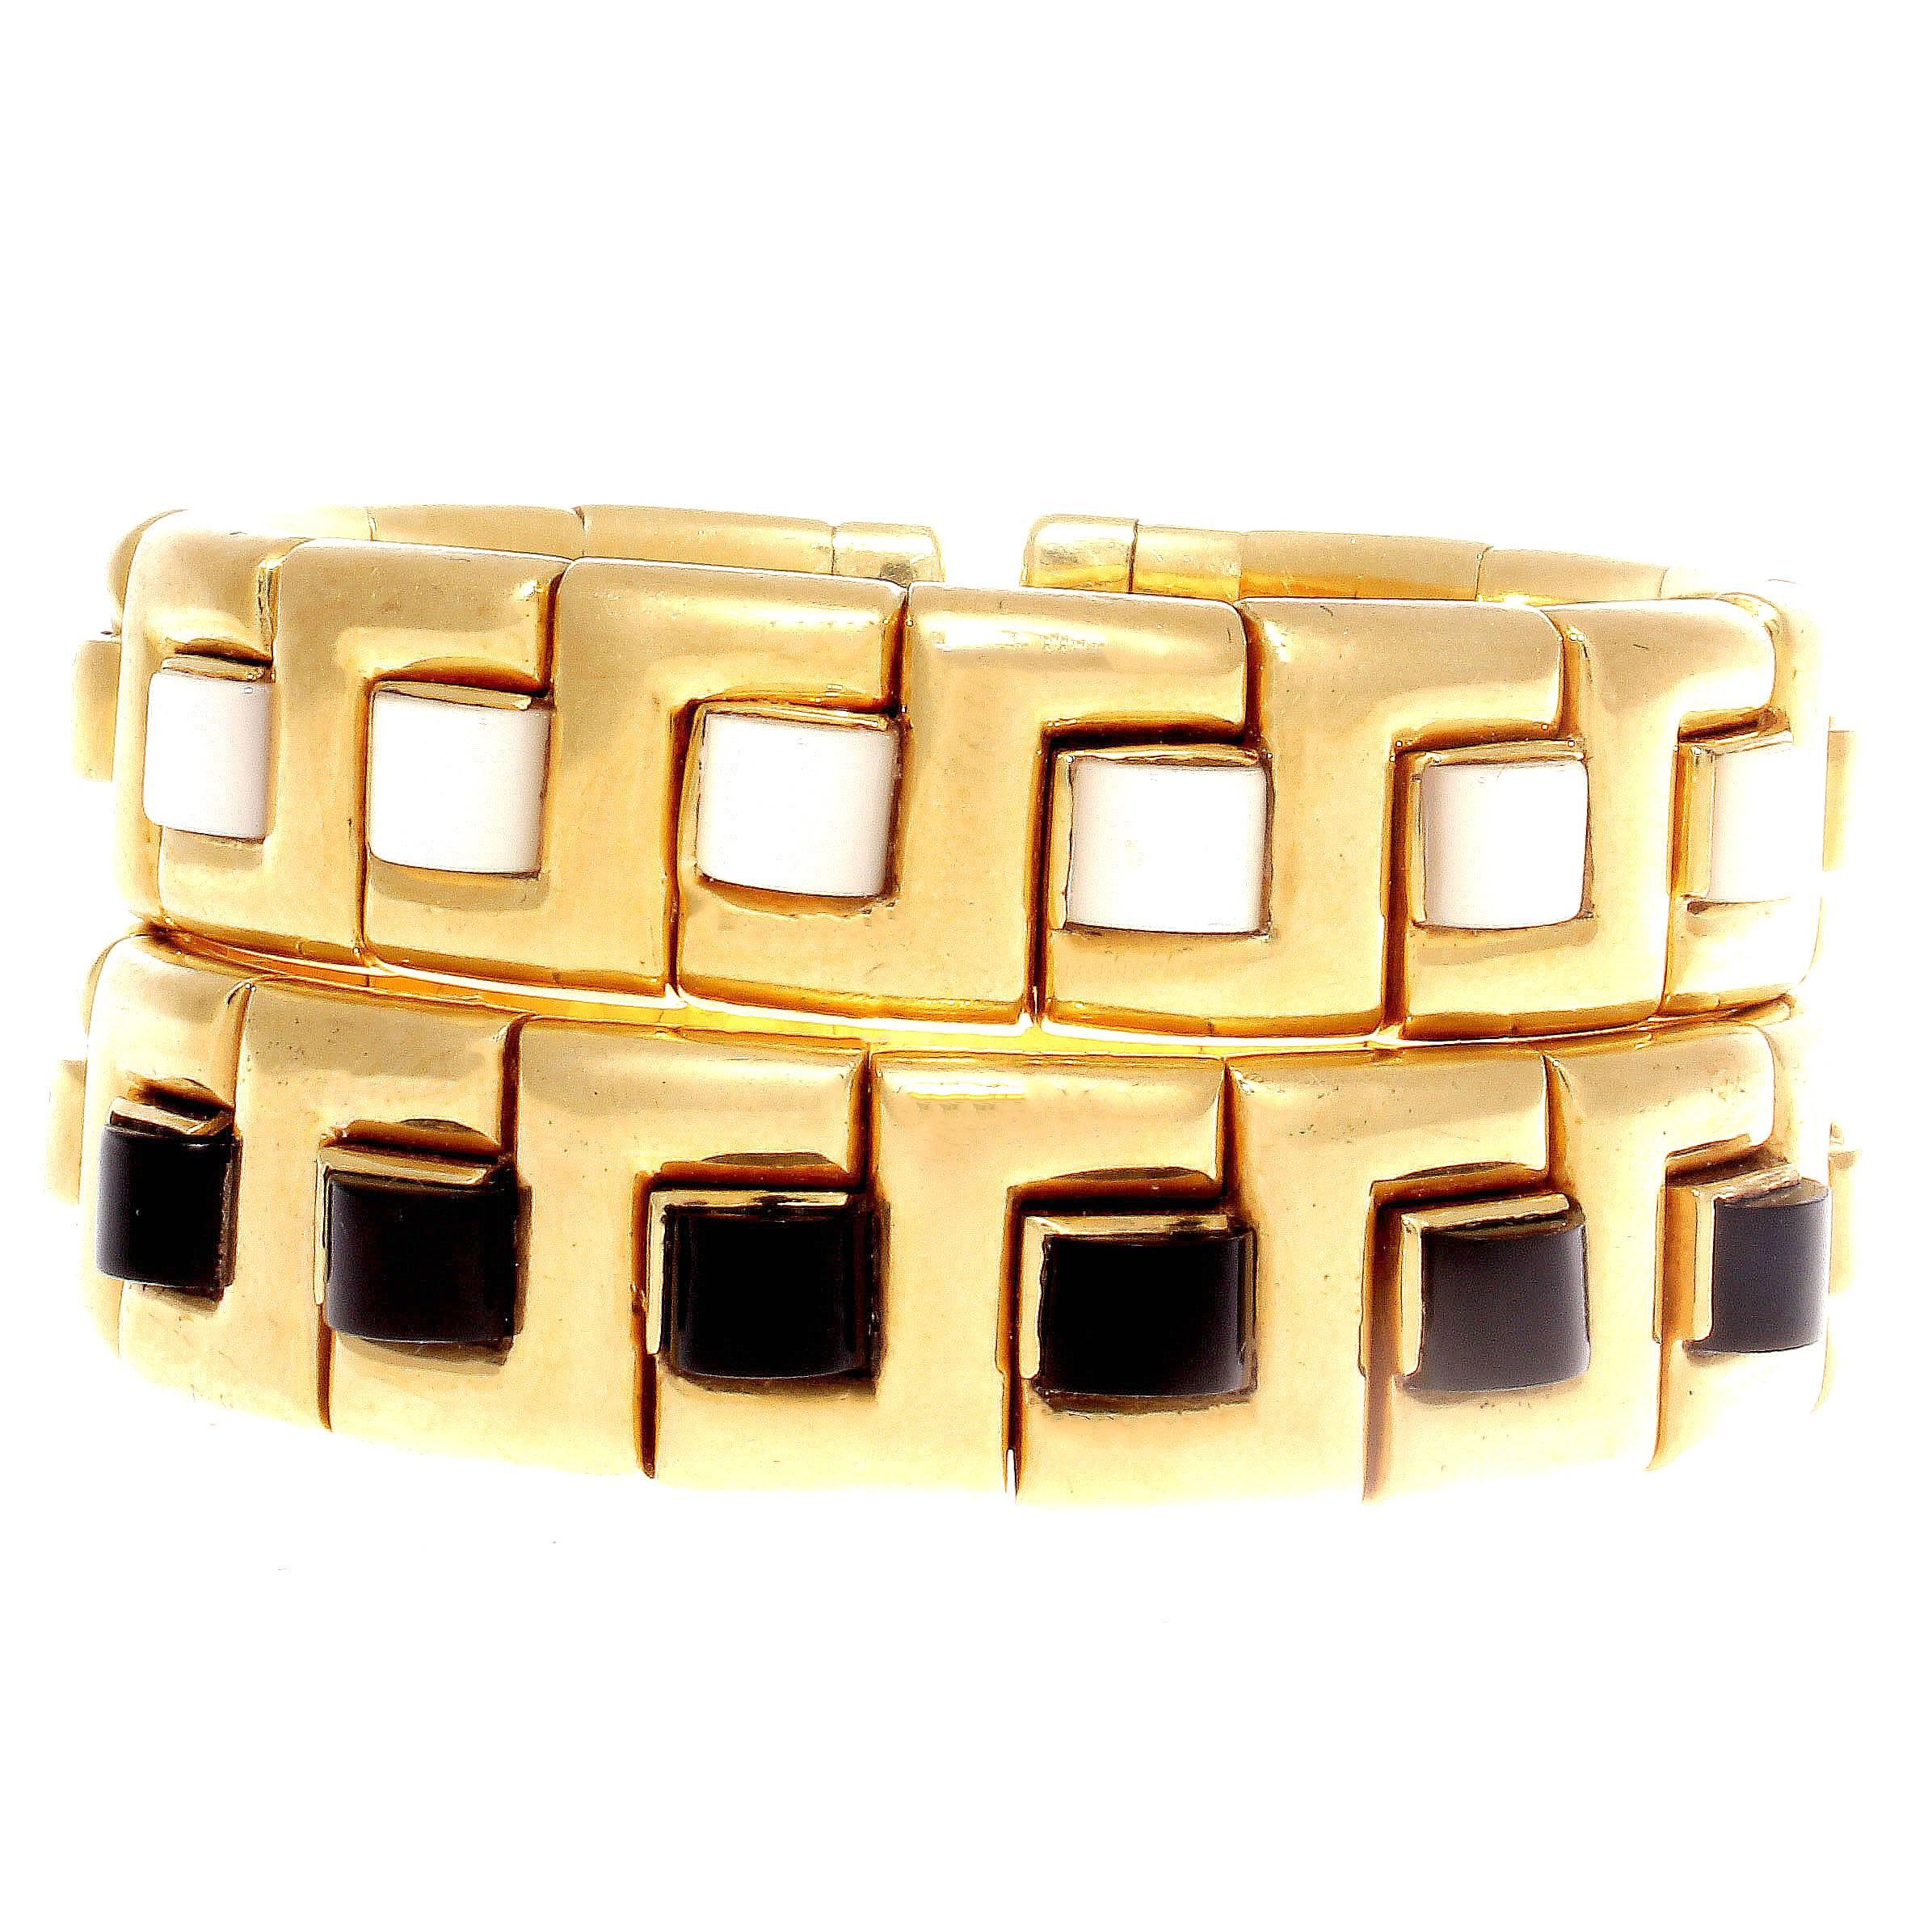 A beautiful creation of Italian elegance. Featuring perfectly spaced jet black onyx separating the carved glistening 18k yellow gold. Stamped Italy.

Please contact us if you would you would like to purchase the matching mother-of-pearl bracelet. 